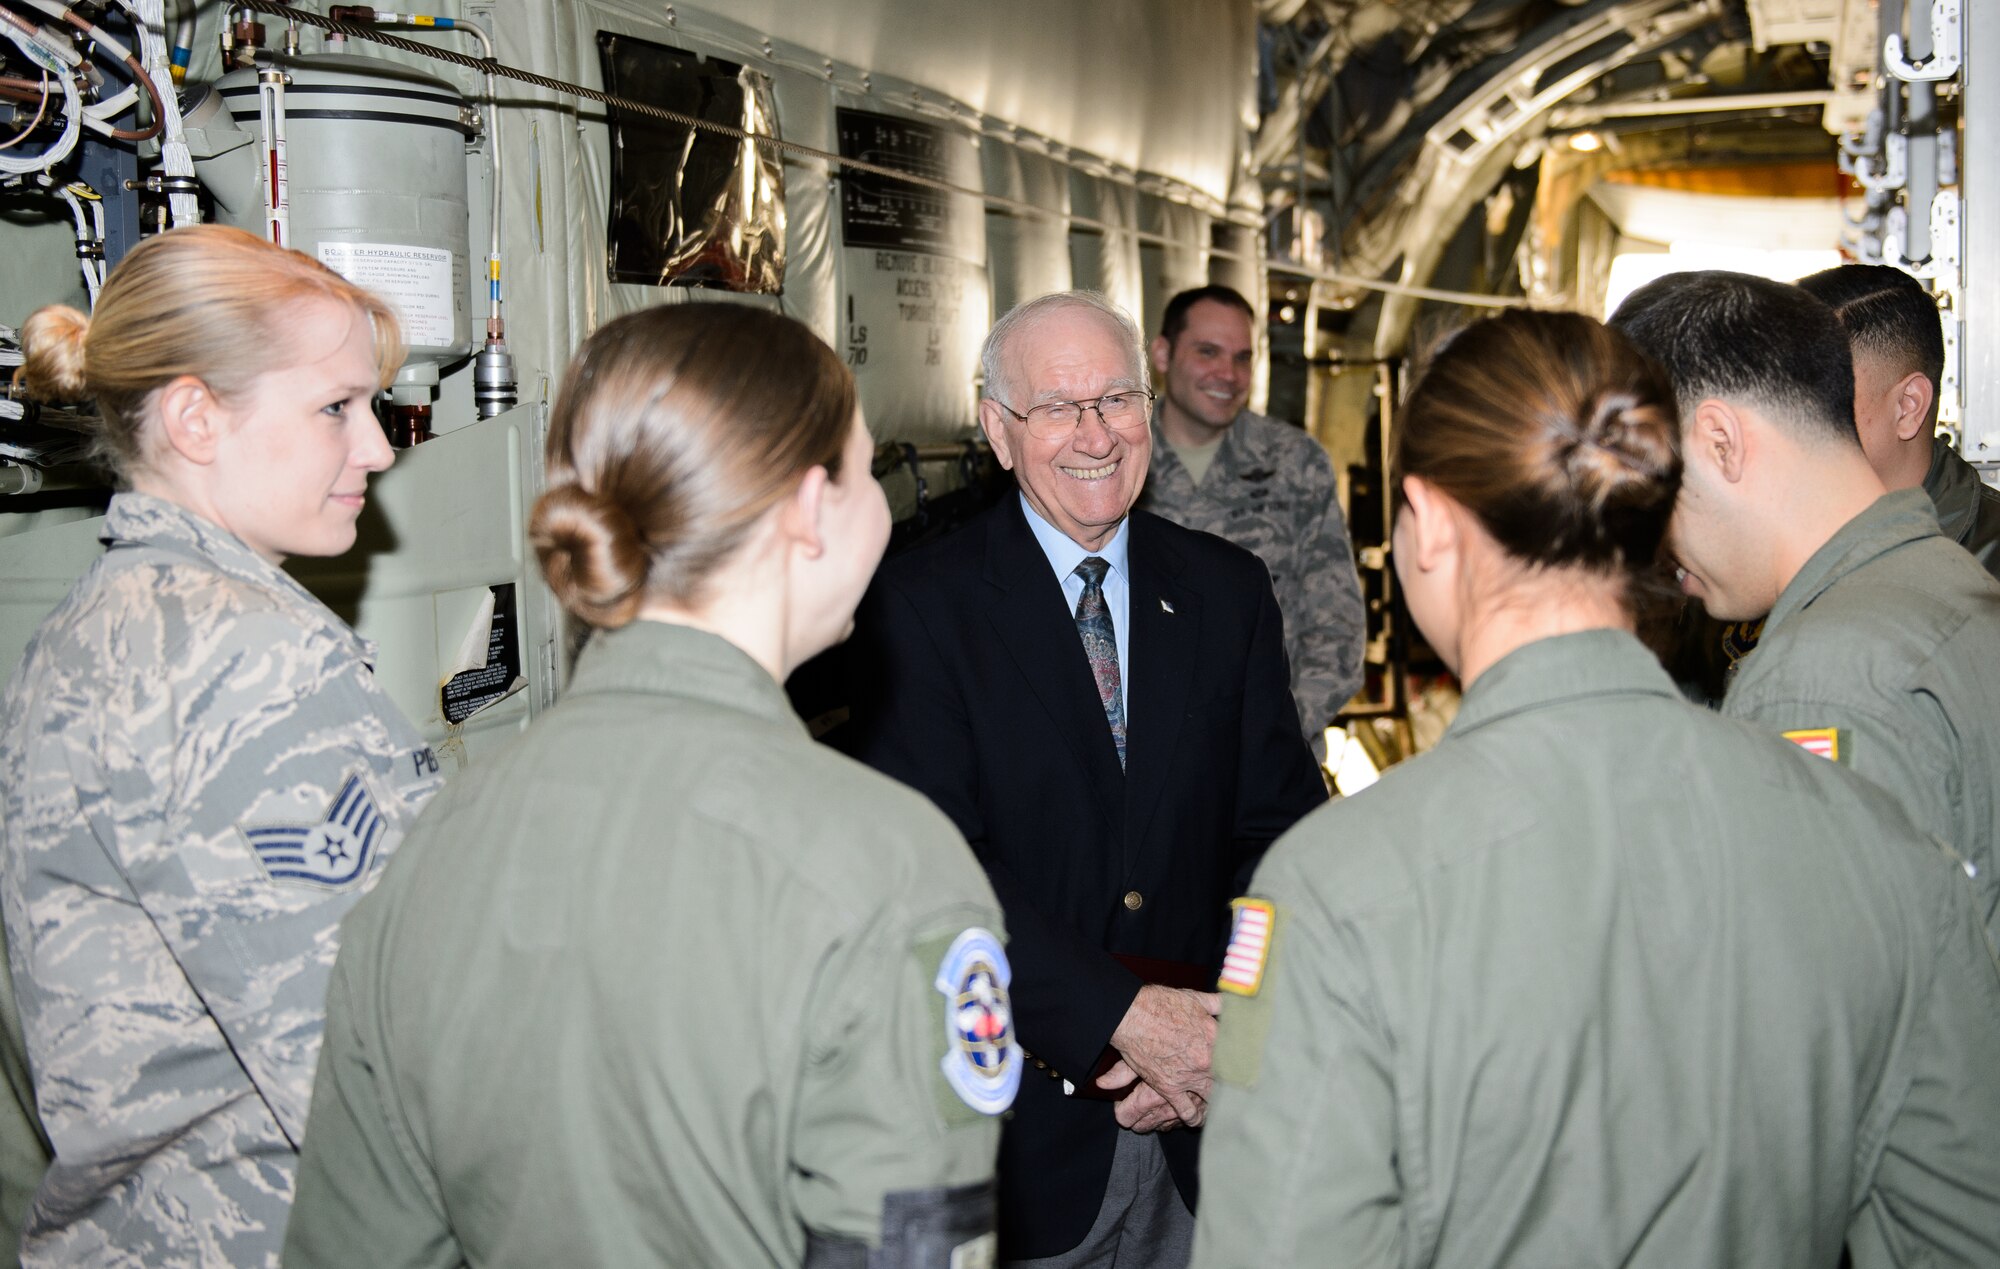 Sam E. Parish, retired Chief Master Sergeant of the Air Force, speaks with Airmen of the 86th Airlift Wing during a base visit Jan. 26, 2015, at Ramstein Air Base, Germany. Prior to guest speaking at the Chiefs Recognition Ceremony at Ramstein, Parish learned about the multiple missions of the 86th AW, 435th Air Ground Operations Wing and 521st Air Mobility Wing. The Airmen of the 86th AW showed Parish how they generate and employ air mobility enabling theater and strategic airpower by operating a key Air Force power projection platform at Ramstein.  (U.S. Air Force photo/Staff Sgt. Armando A. Schwier-Morales)